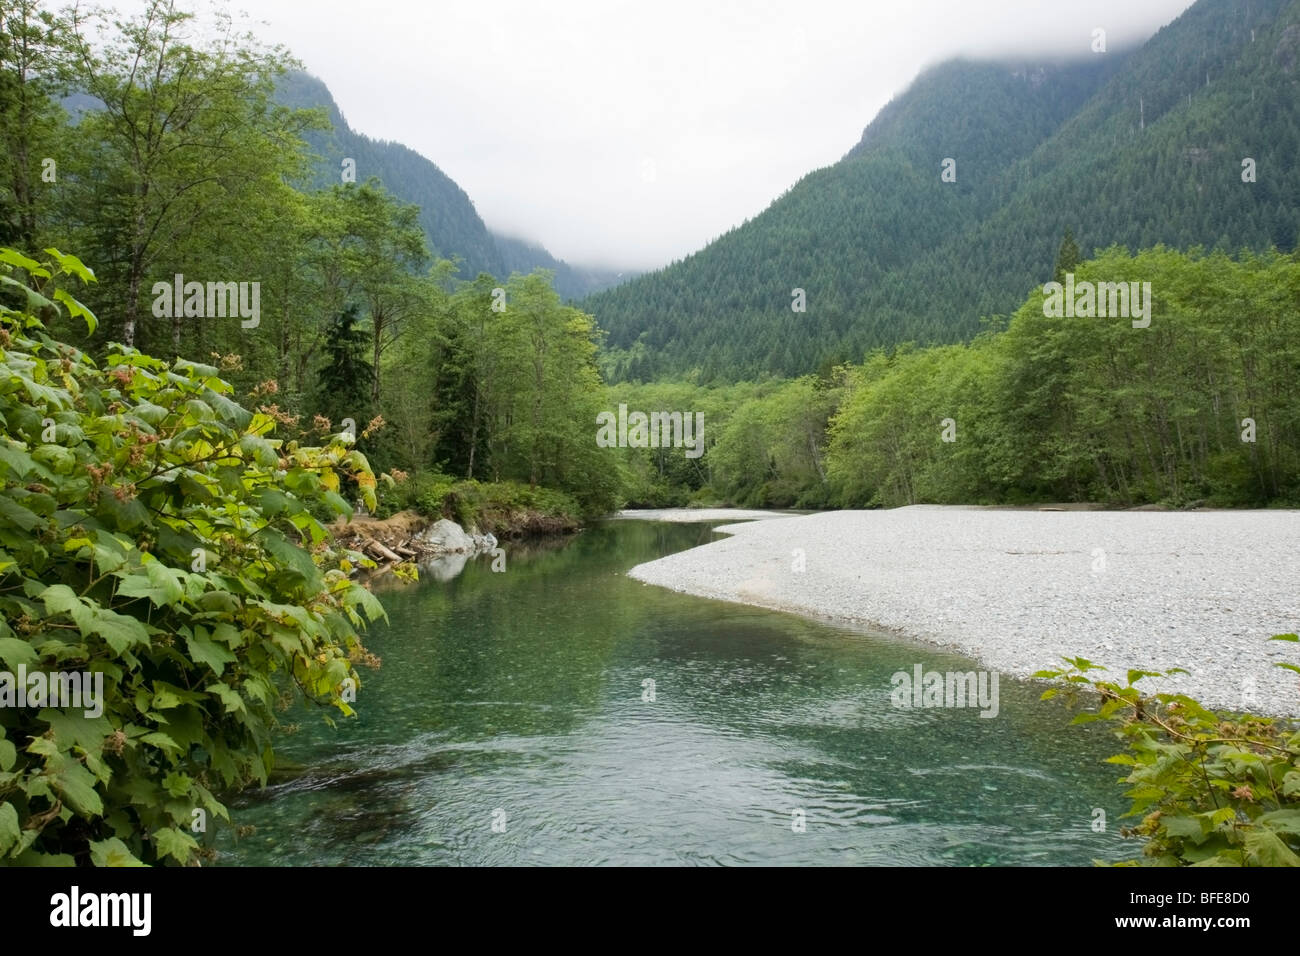 Creek and mountains in Golden Ears Provincial Park in Maple Ridge, British Columbia, Canada Stock Photo